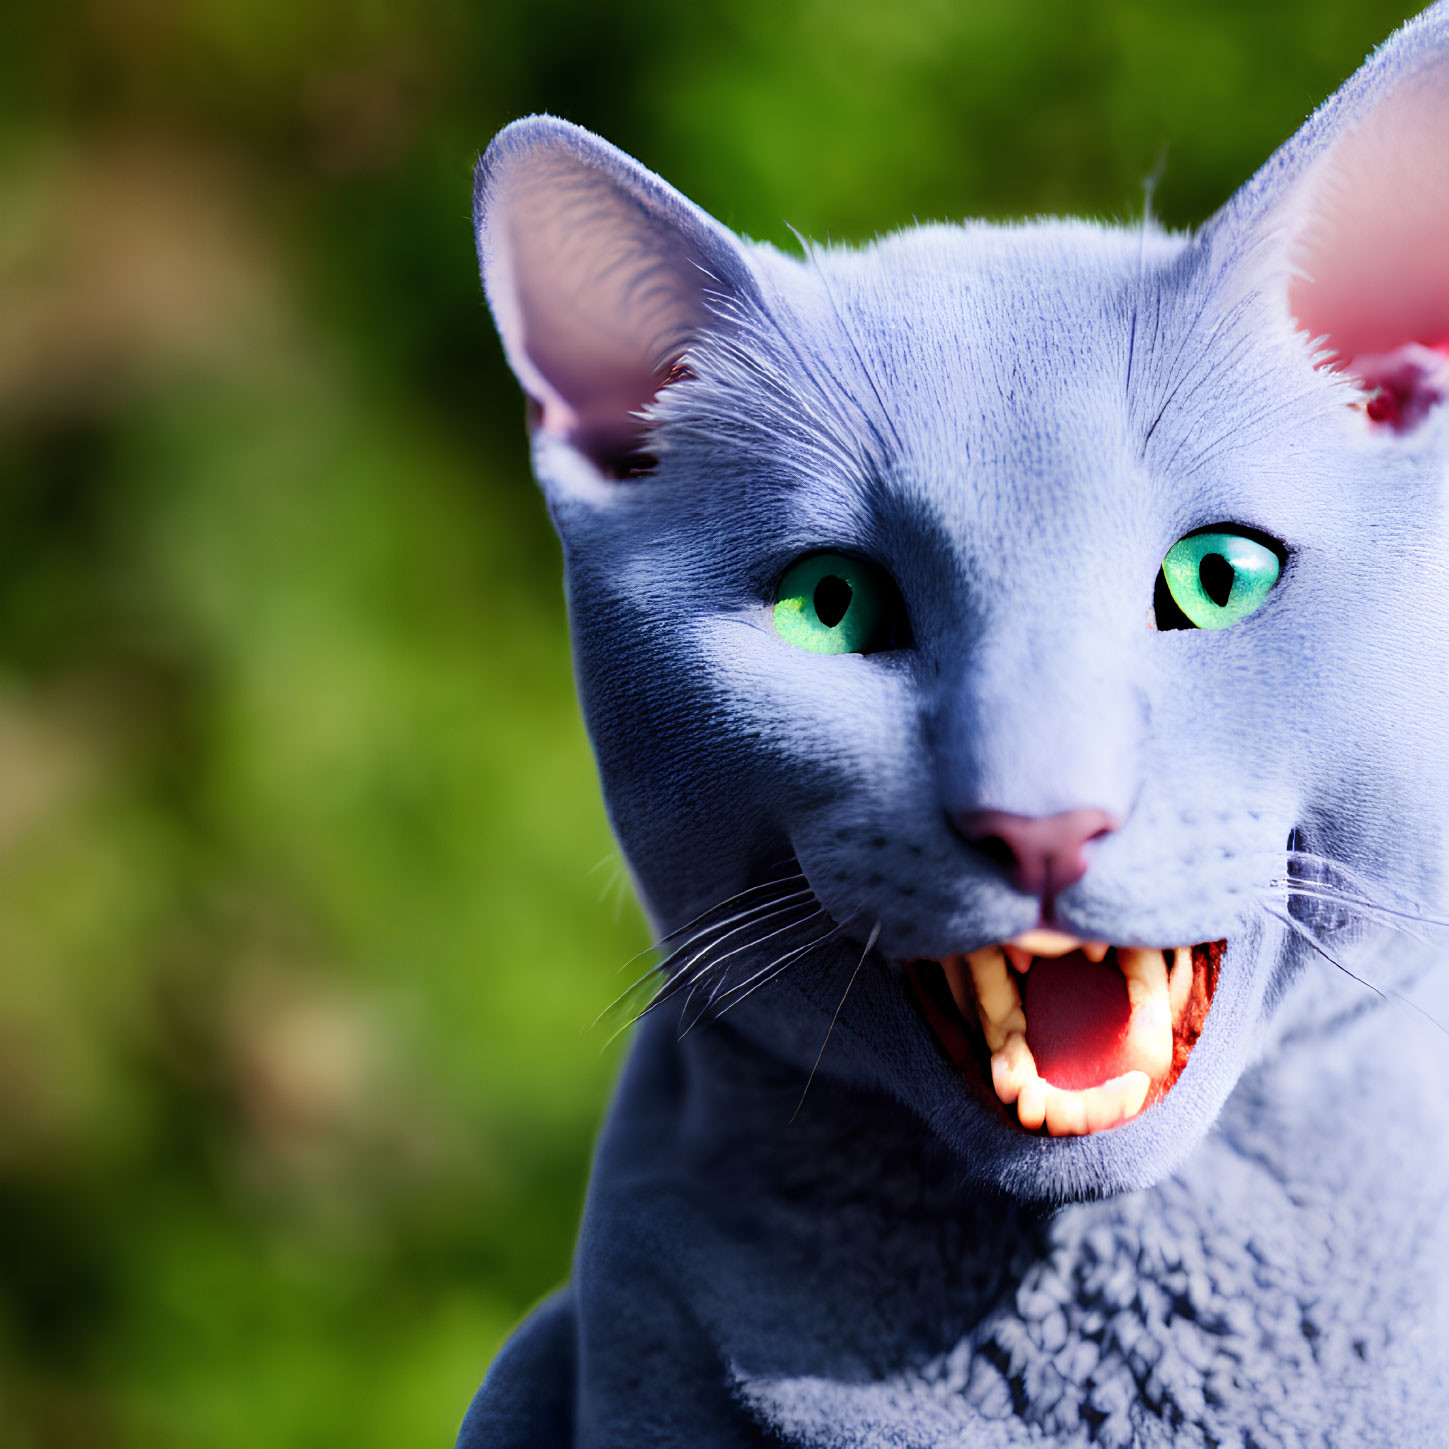 Detailed Close-Up of Blue Cat Digital Artwork with Human-Like Features